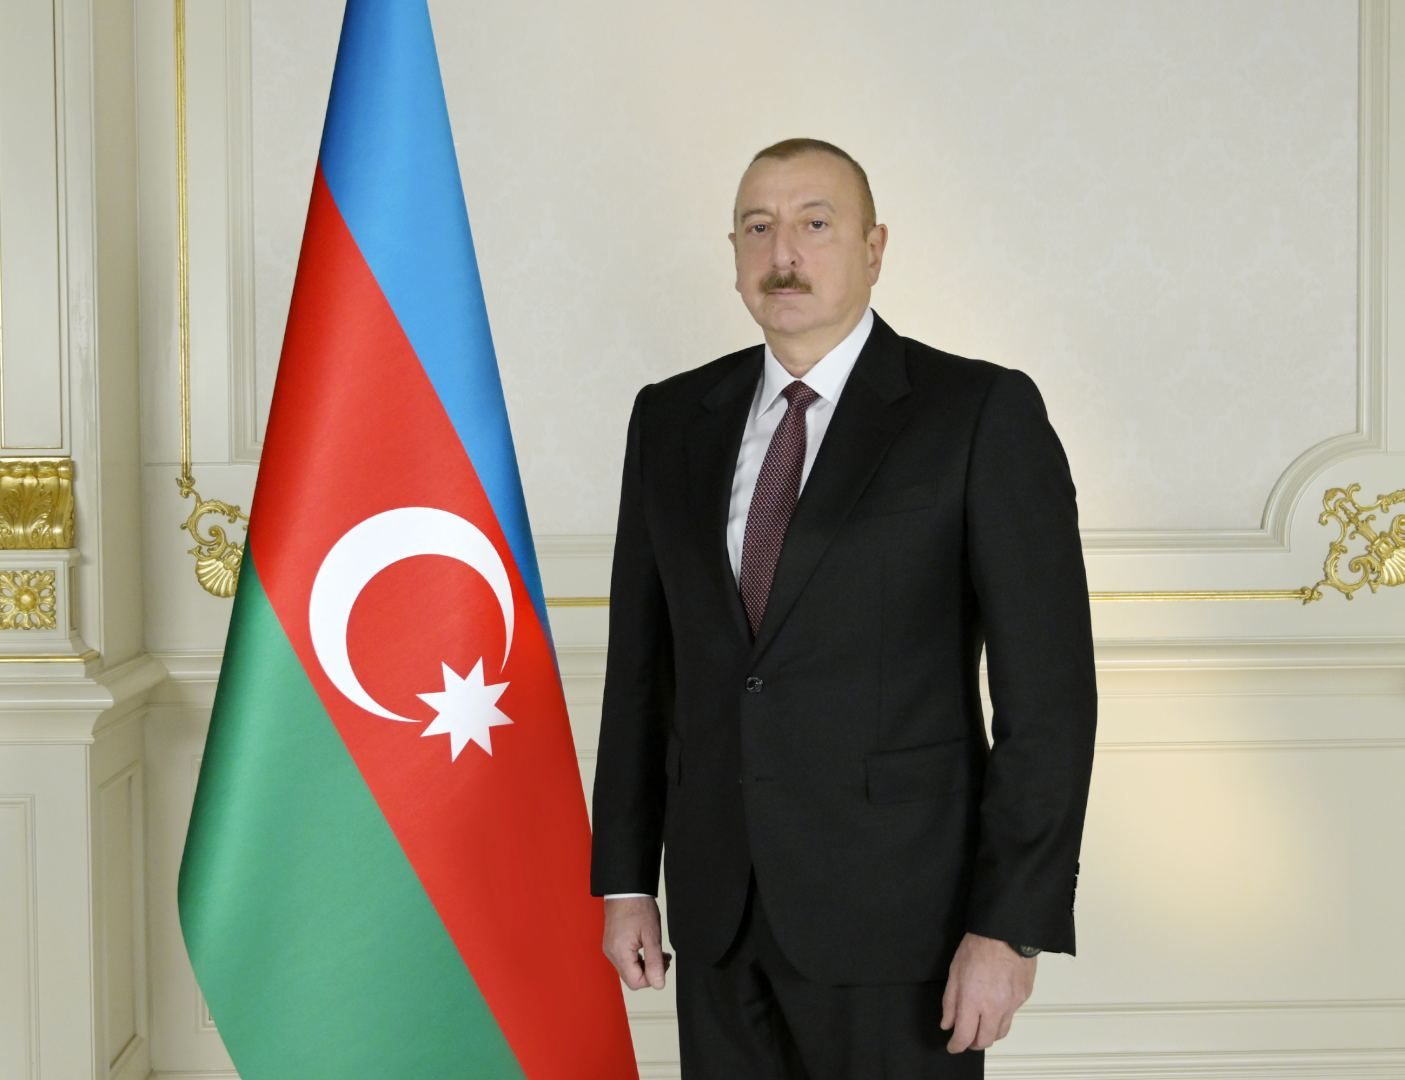 Group of persons awarded Honored Journalist, personal scholarship of Azerbaijani president